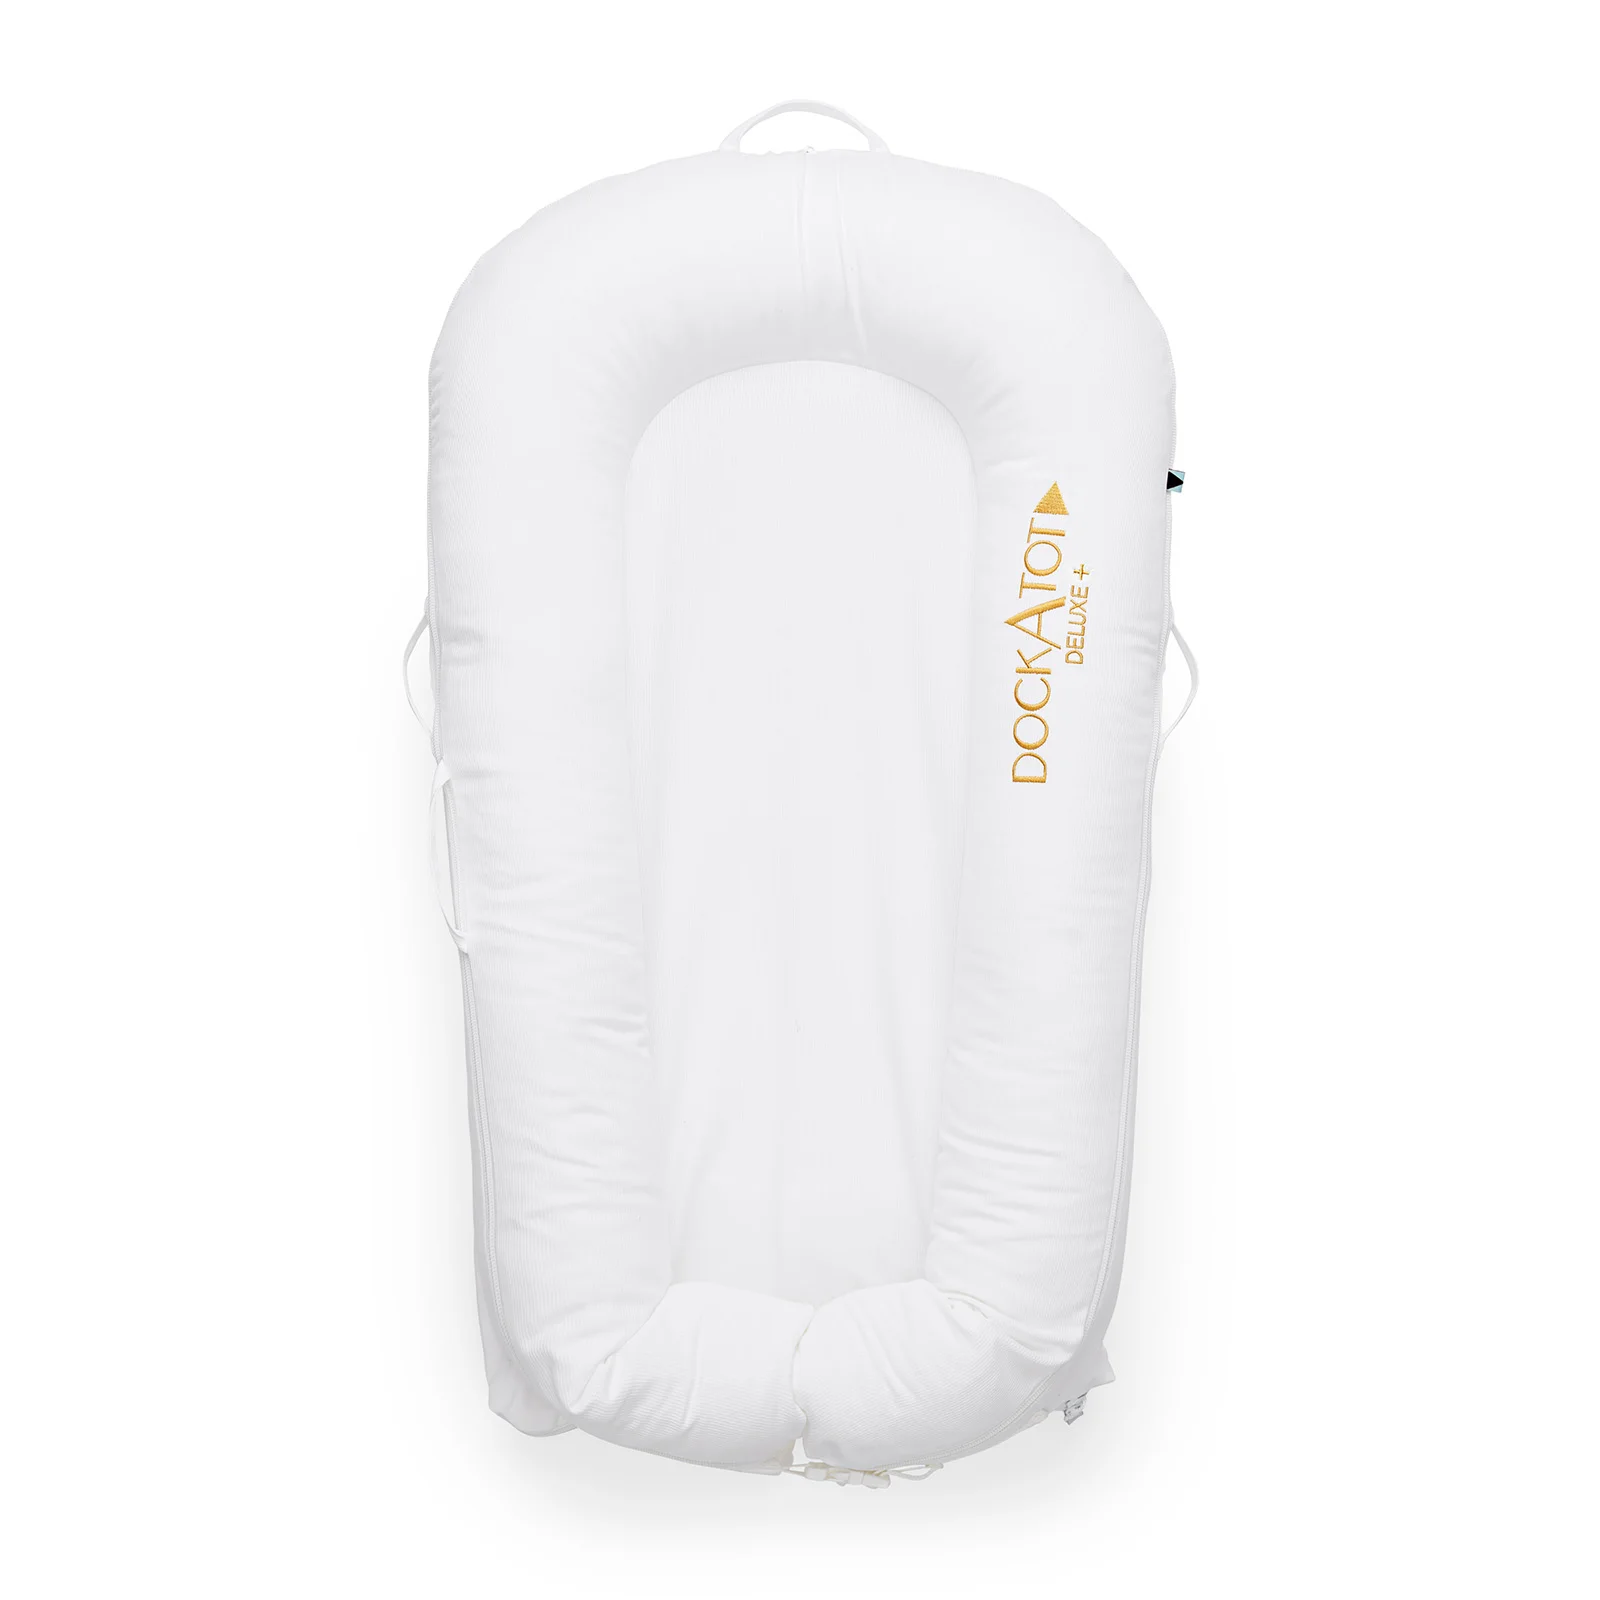 DockATot Deluxe+ Spare Cover for 0-8 Months - Pristine White Image 1